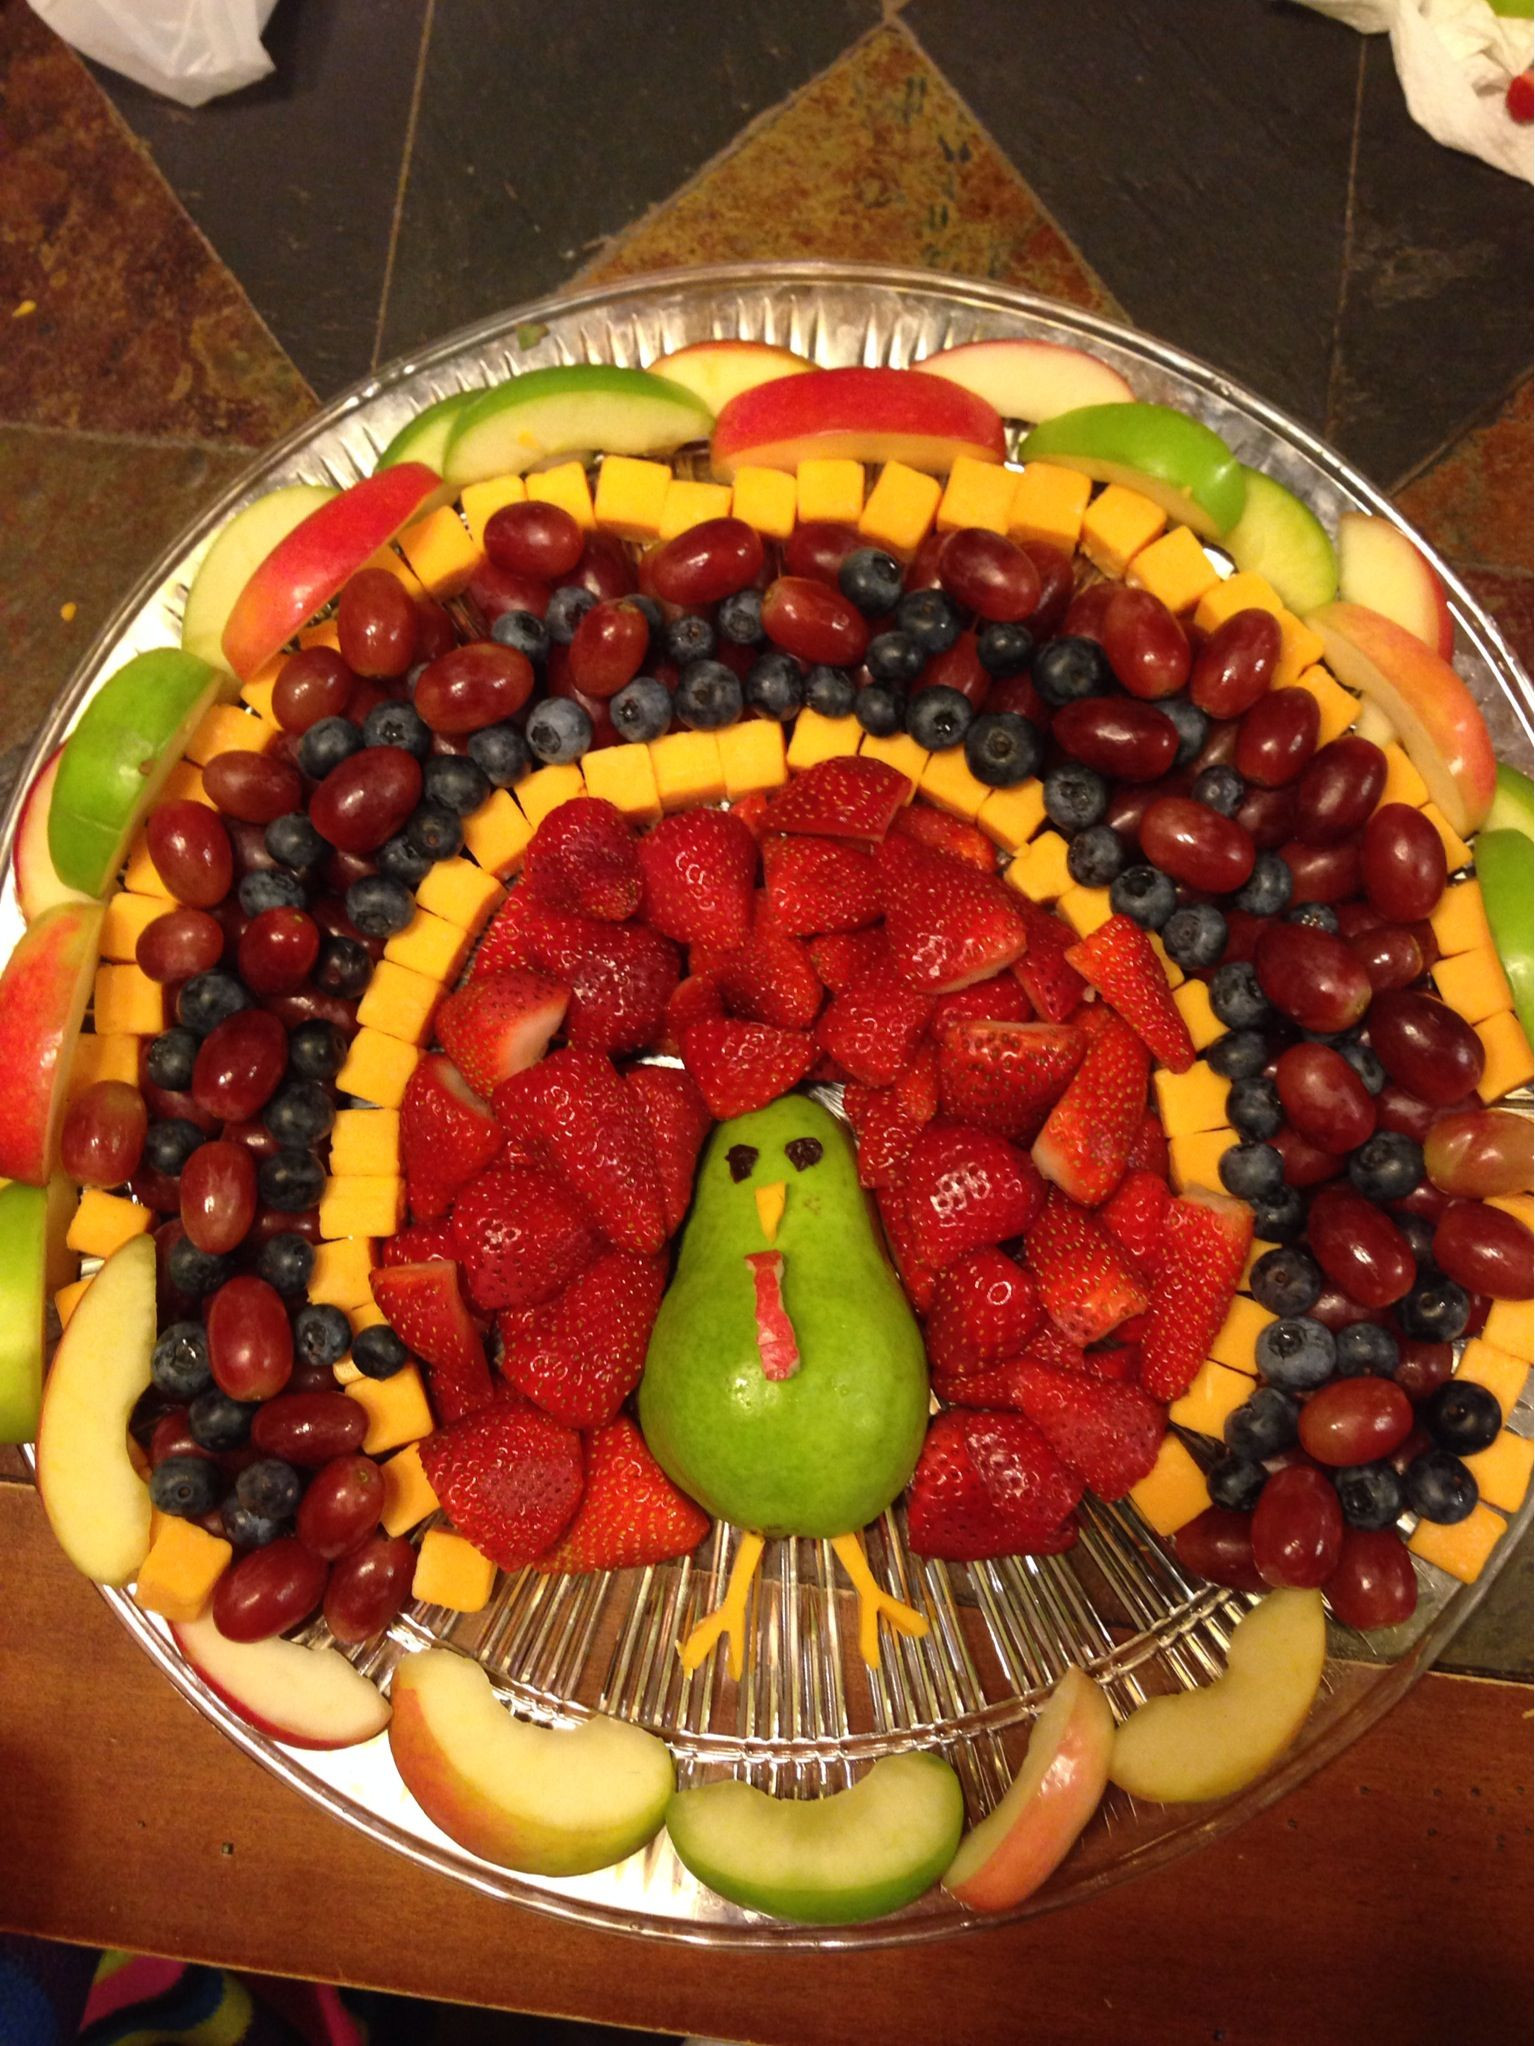 Thanksgiving Fruit Platter Ideas
 Turkey fruit and cheese tray